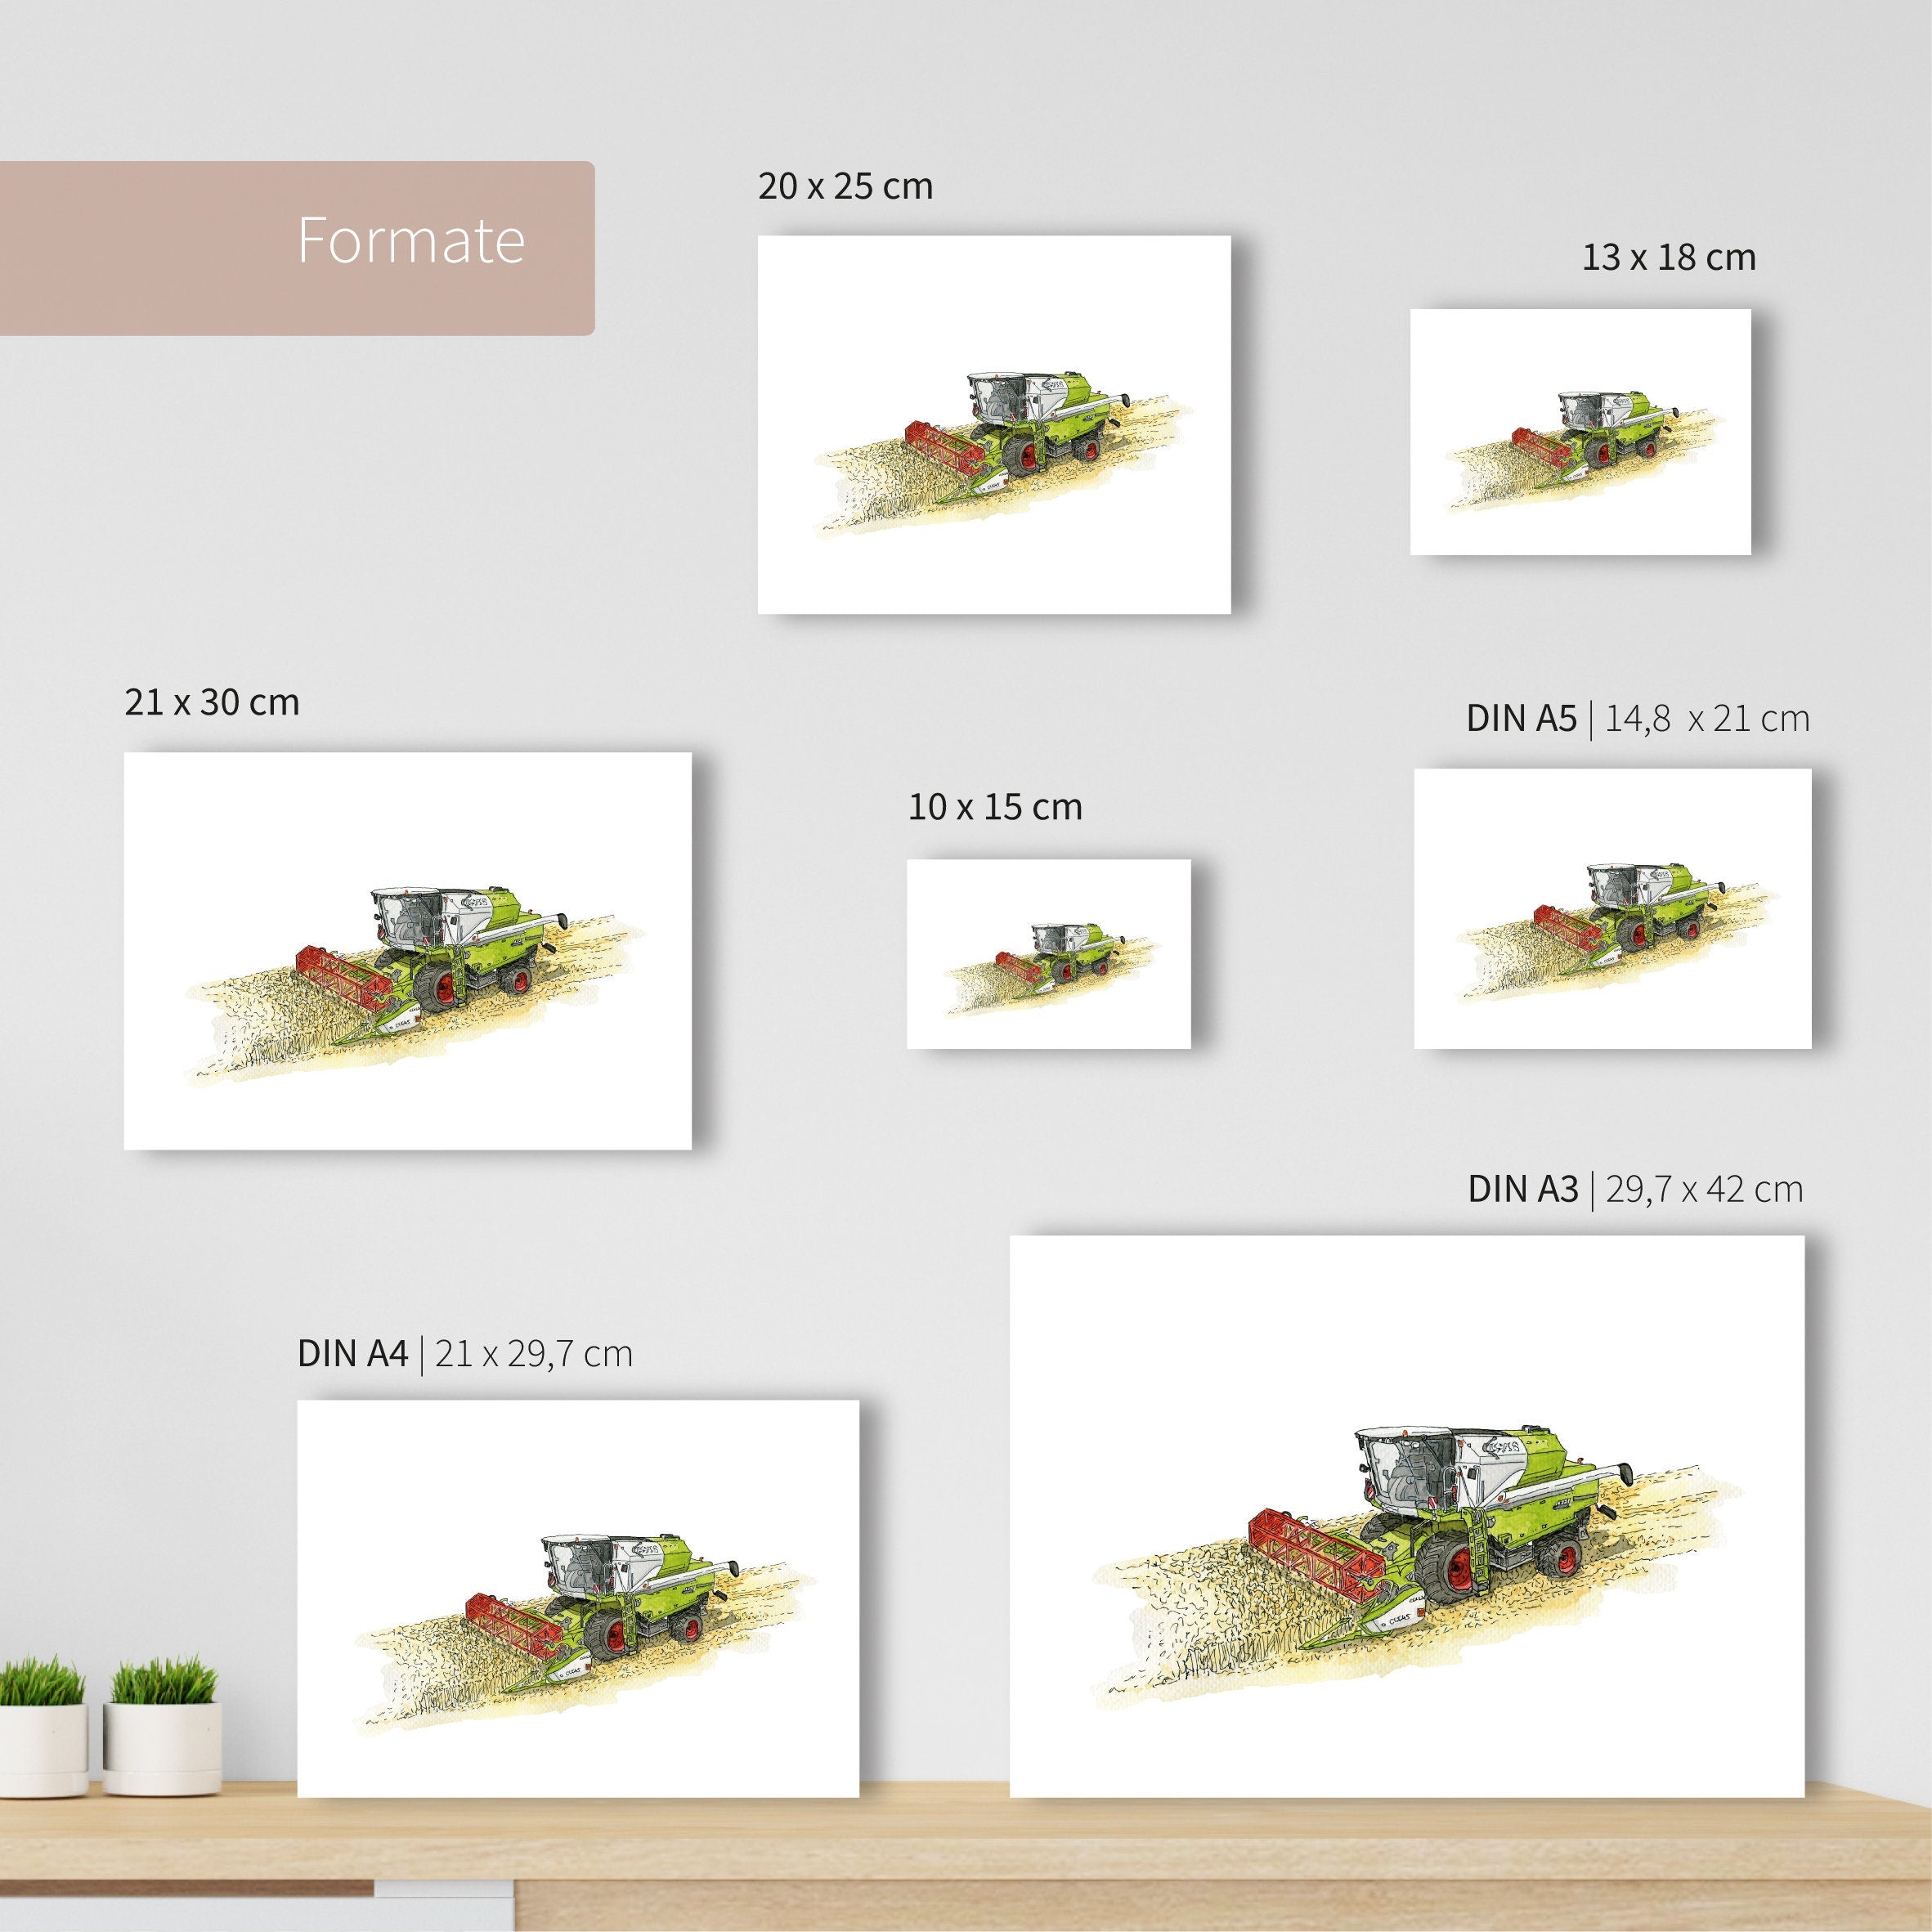 Vehicle Poster - Combine Harvester | Picture for the children's room | gift idea